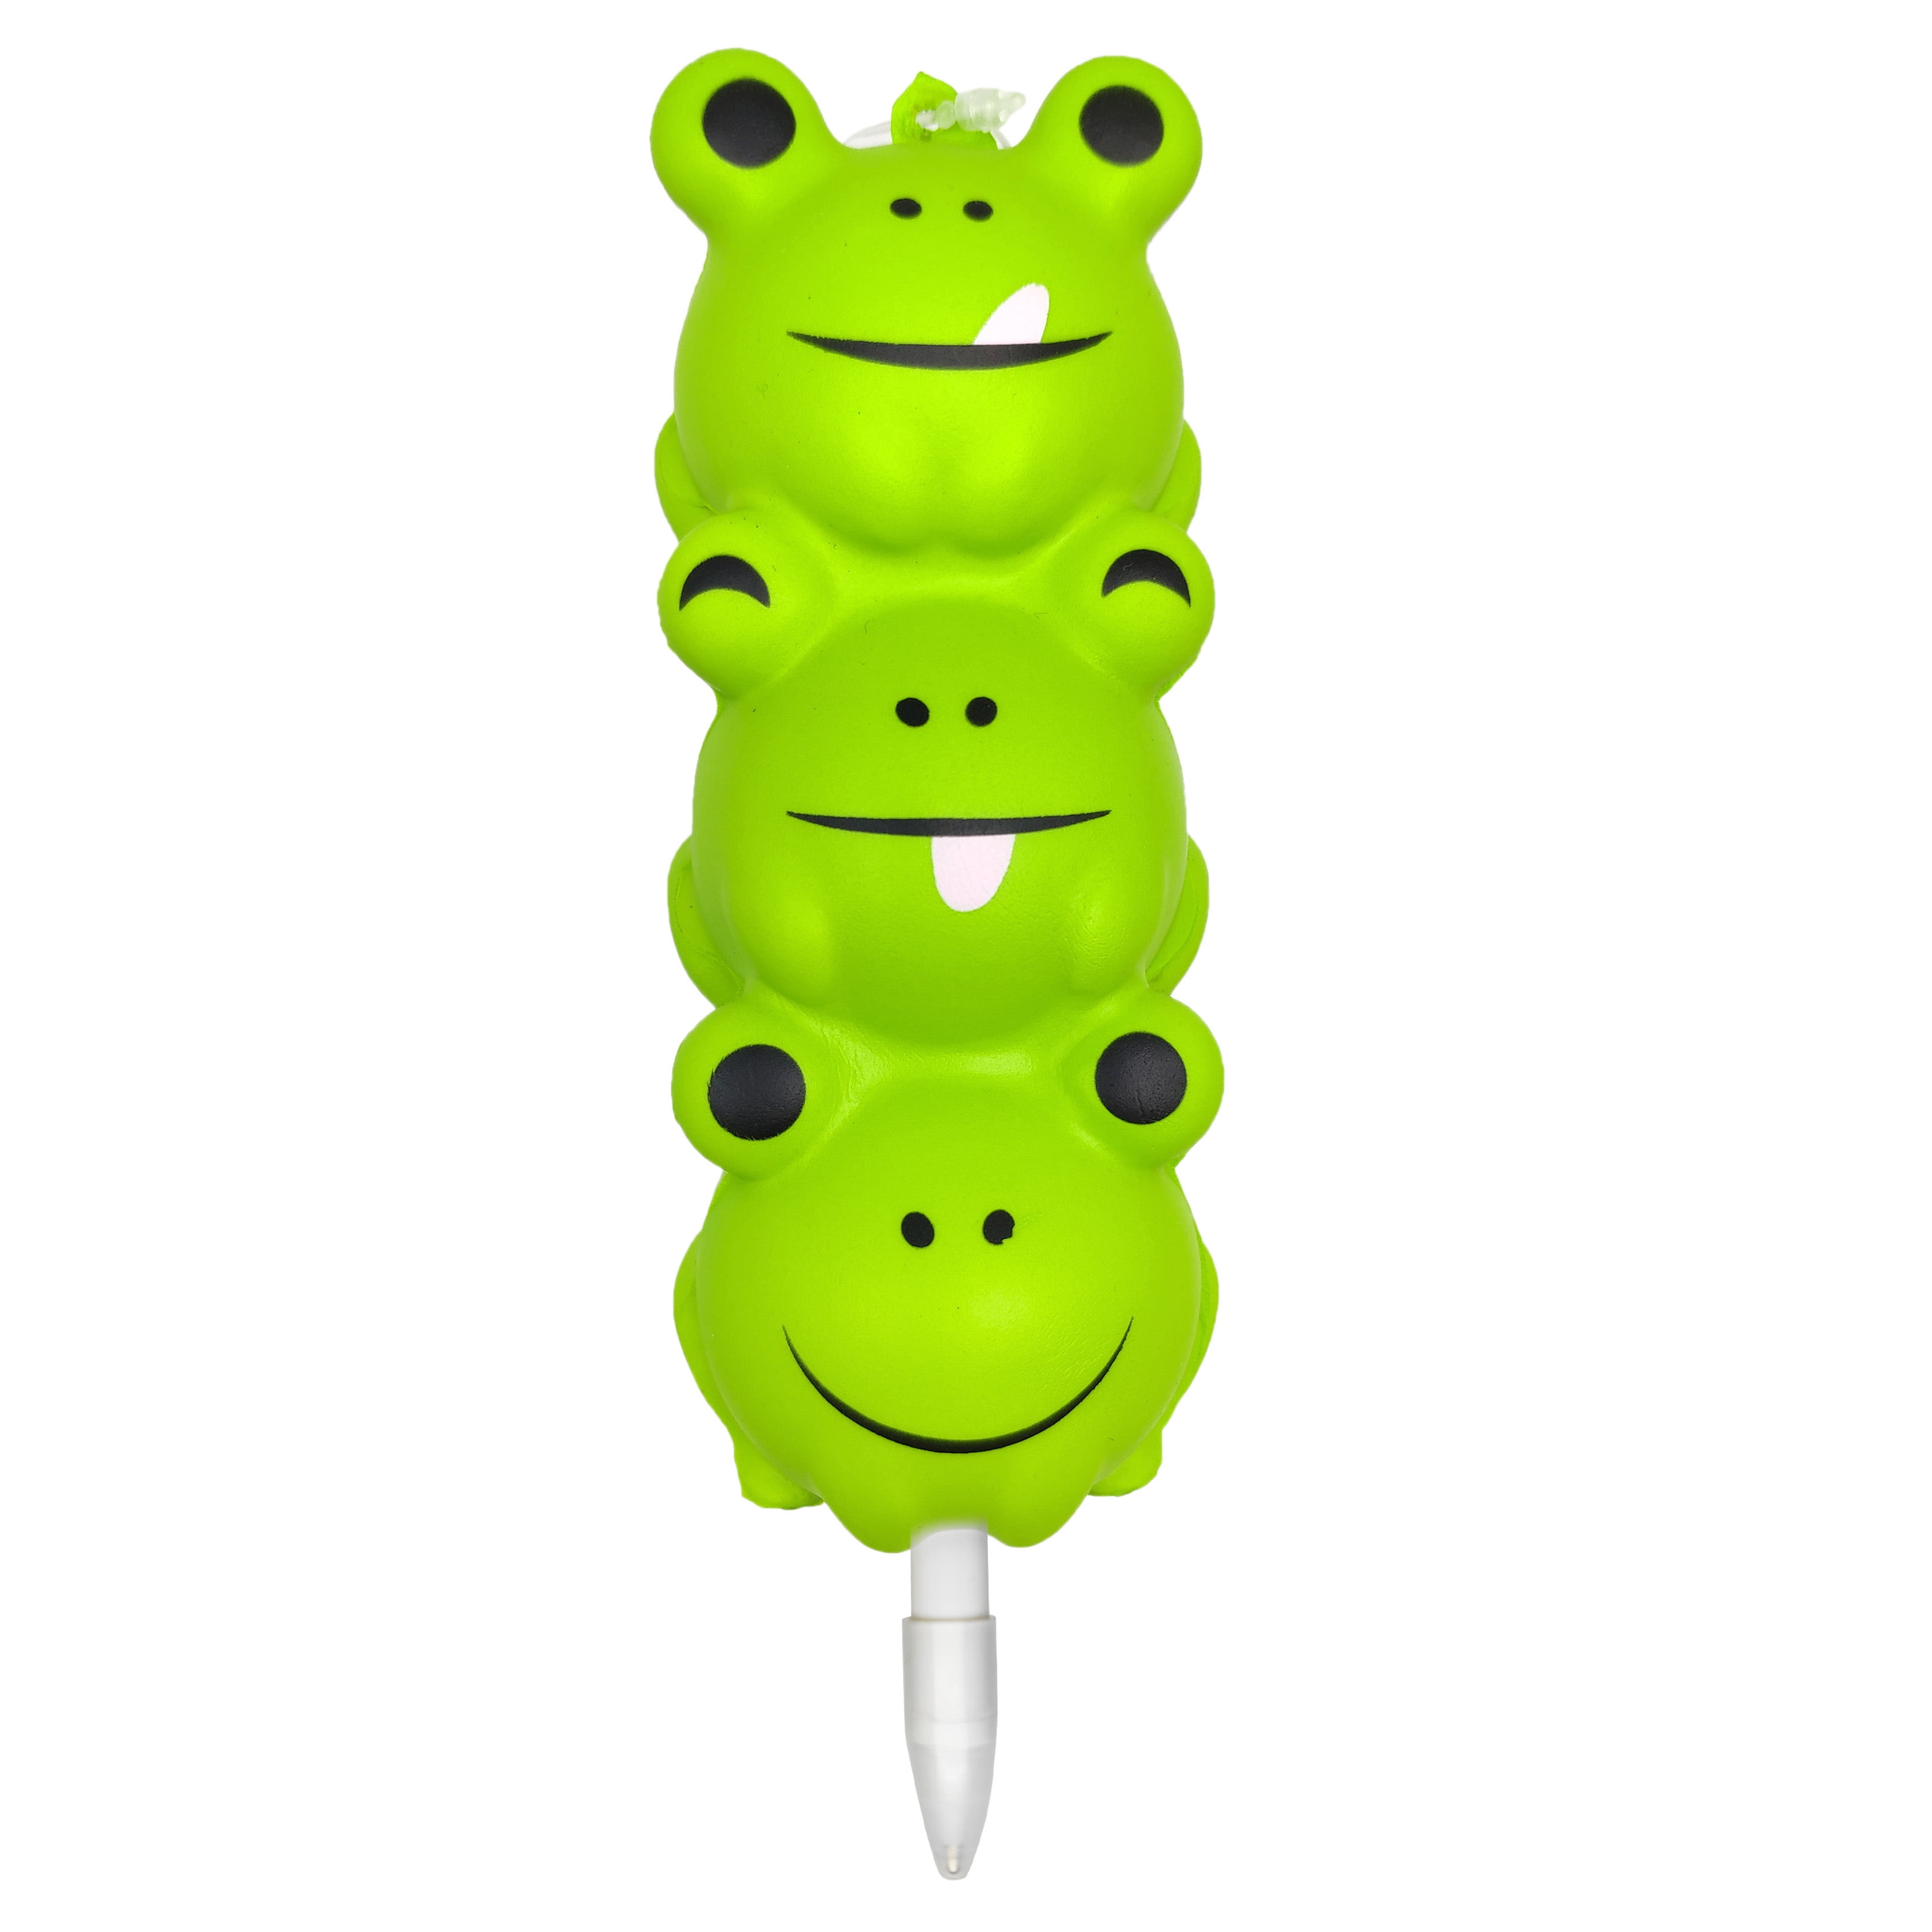 WAY TO CELEBRATE! Easter Squishy Slow Rise Pen Green Frogs